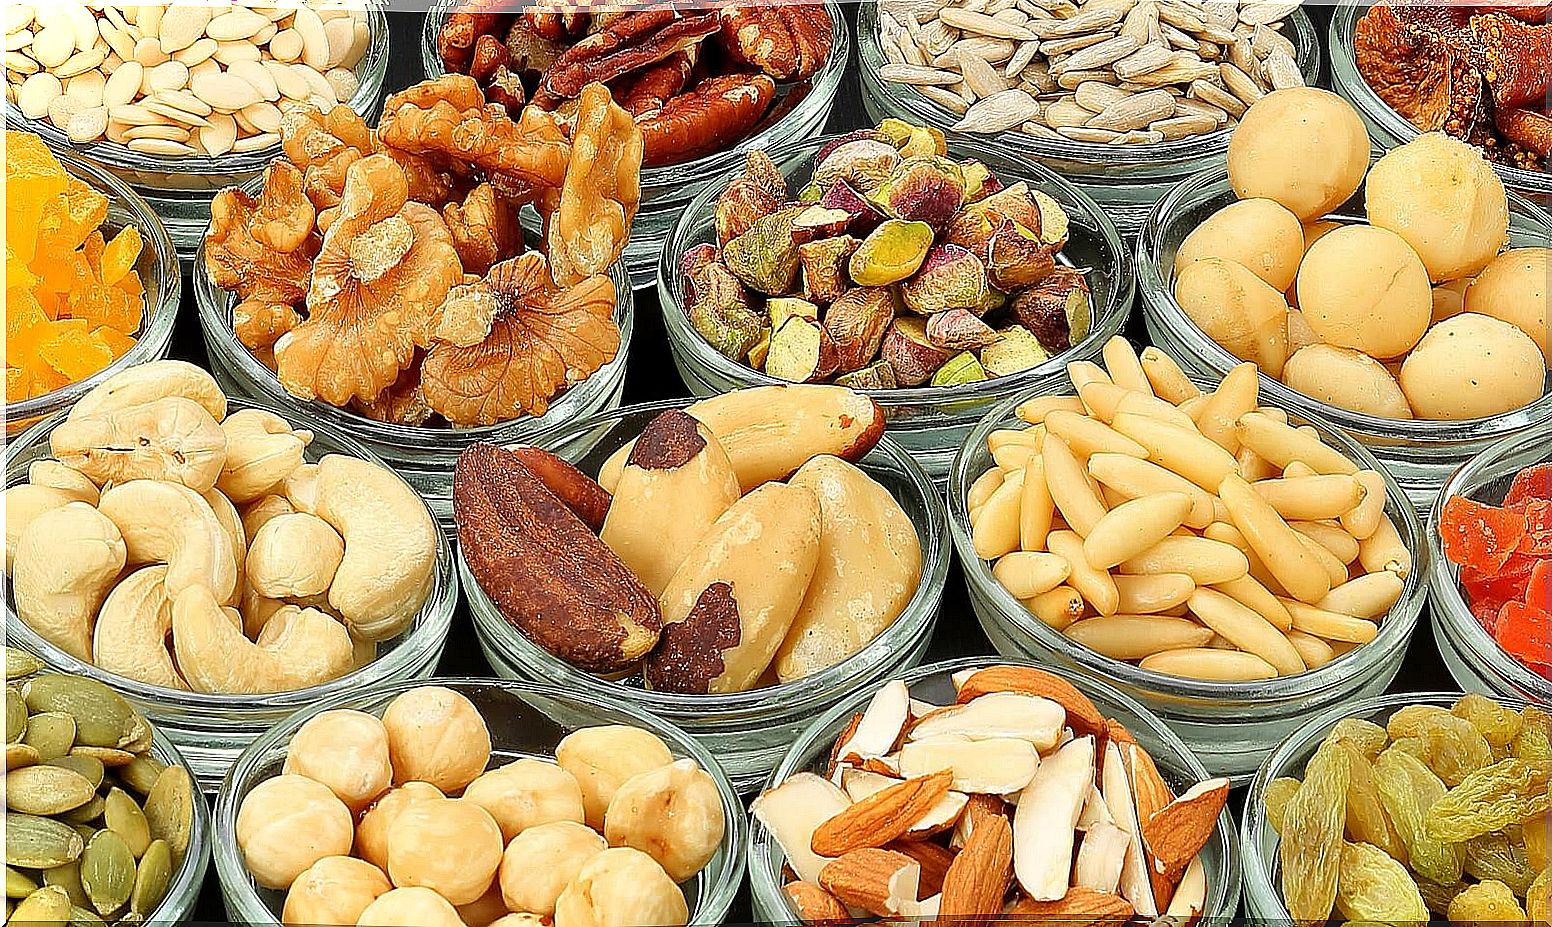 Nuts are one of the foods that help you sleep during pregnancy.